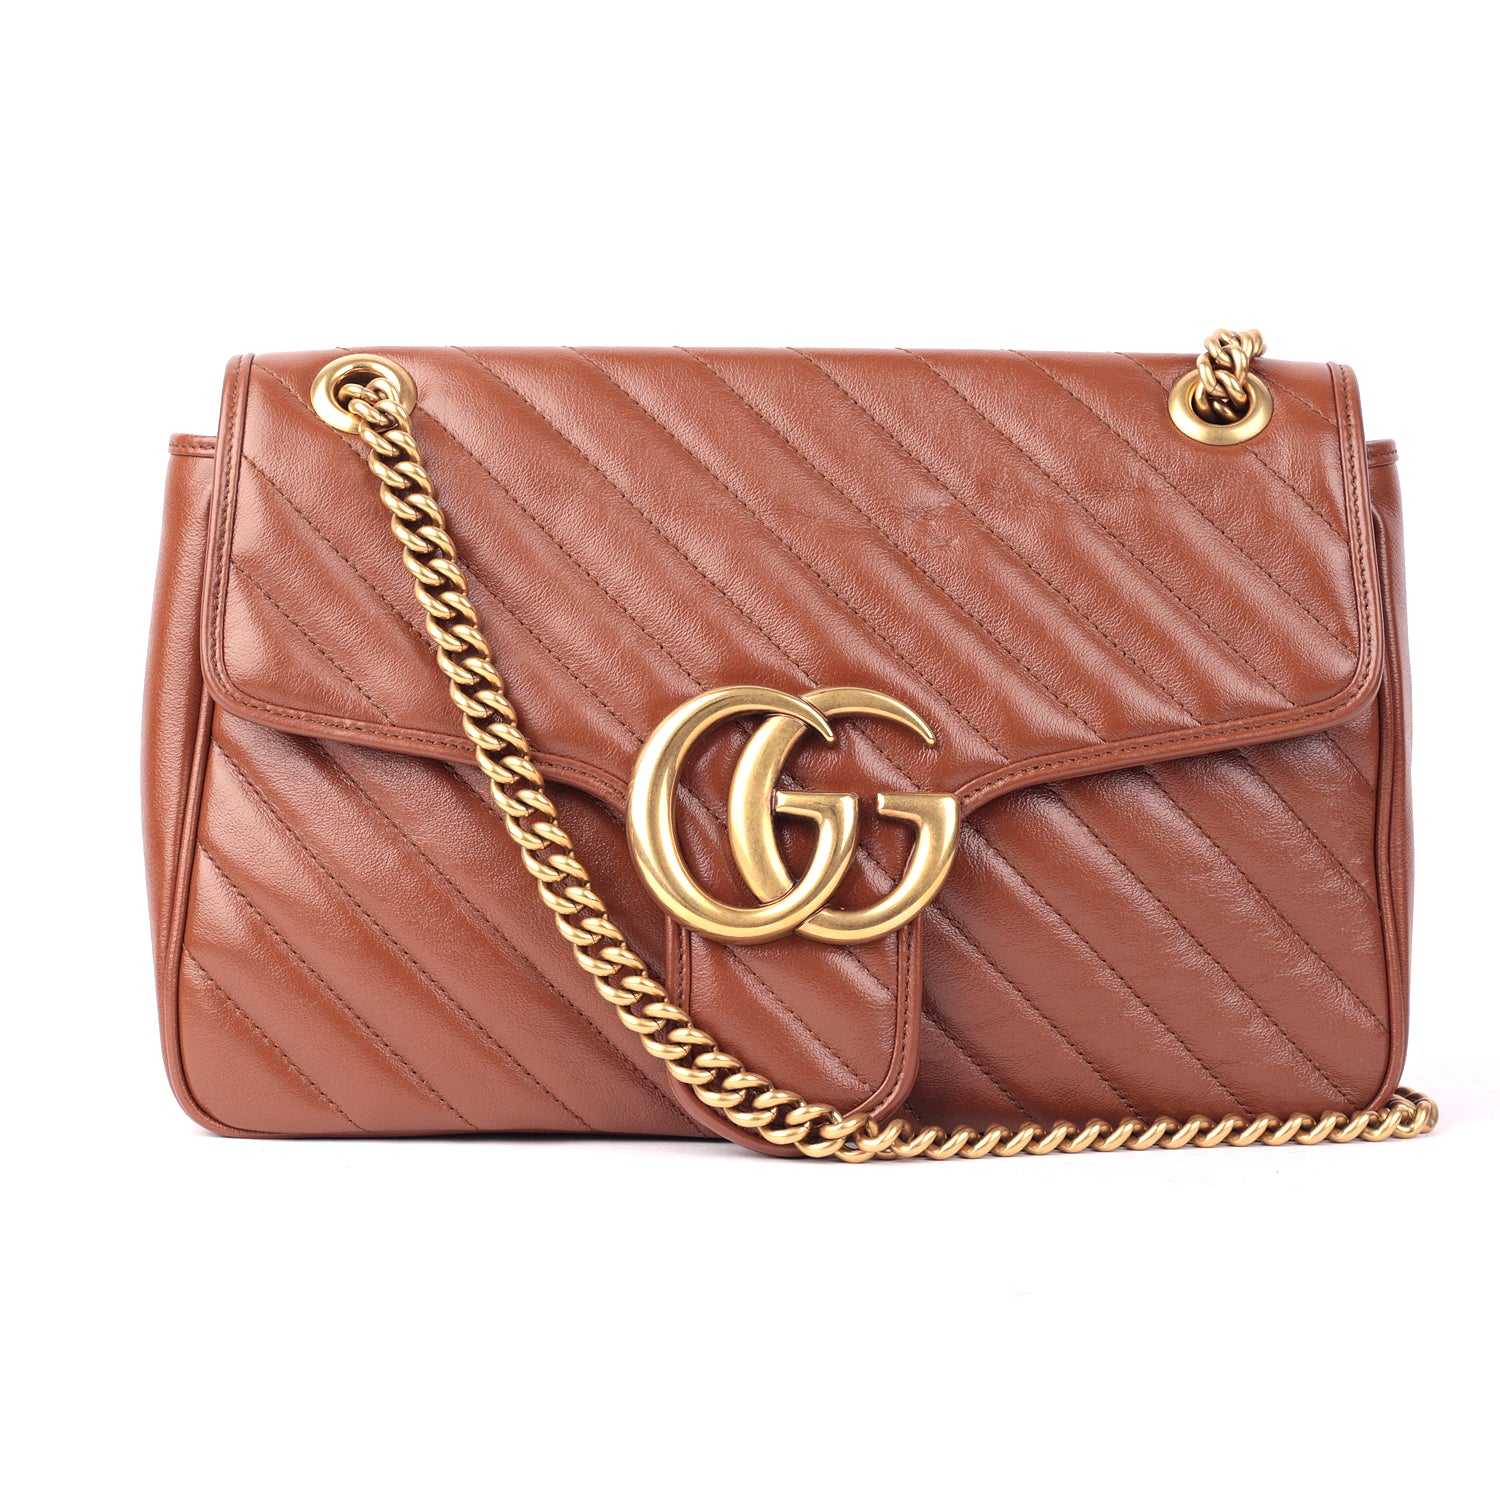 Gucci Diagonal Quilted Leather GG Marmont Bag